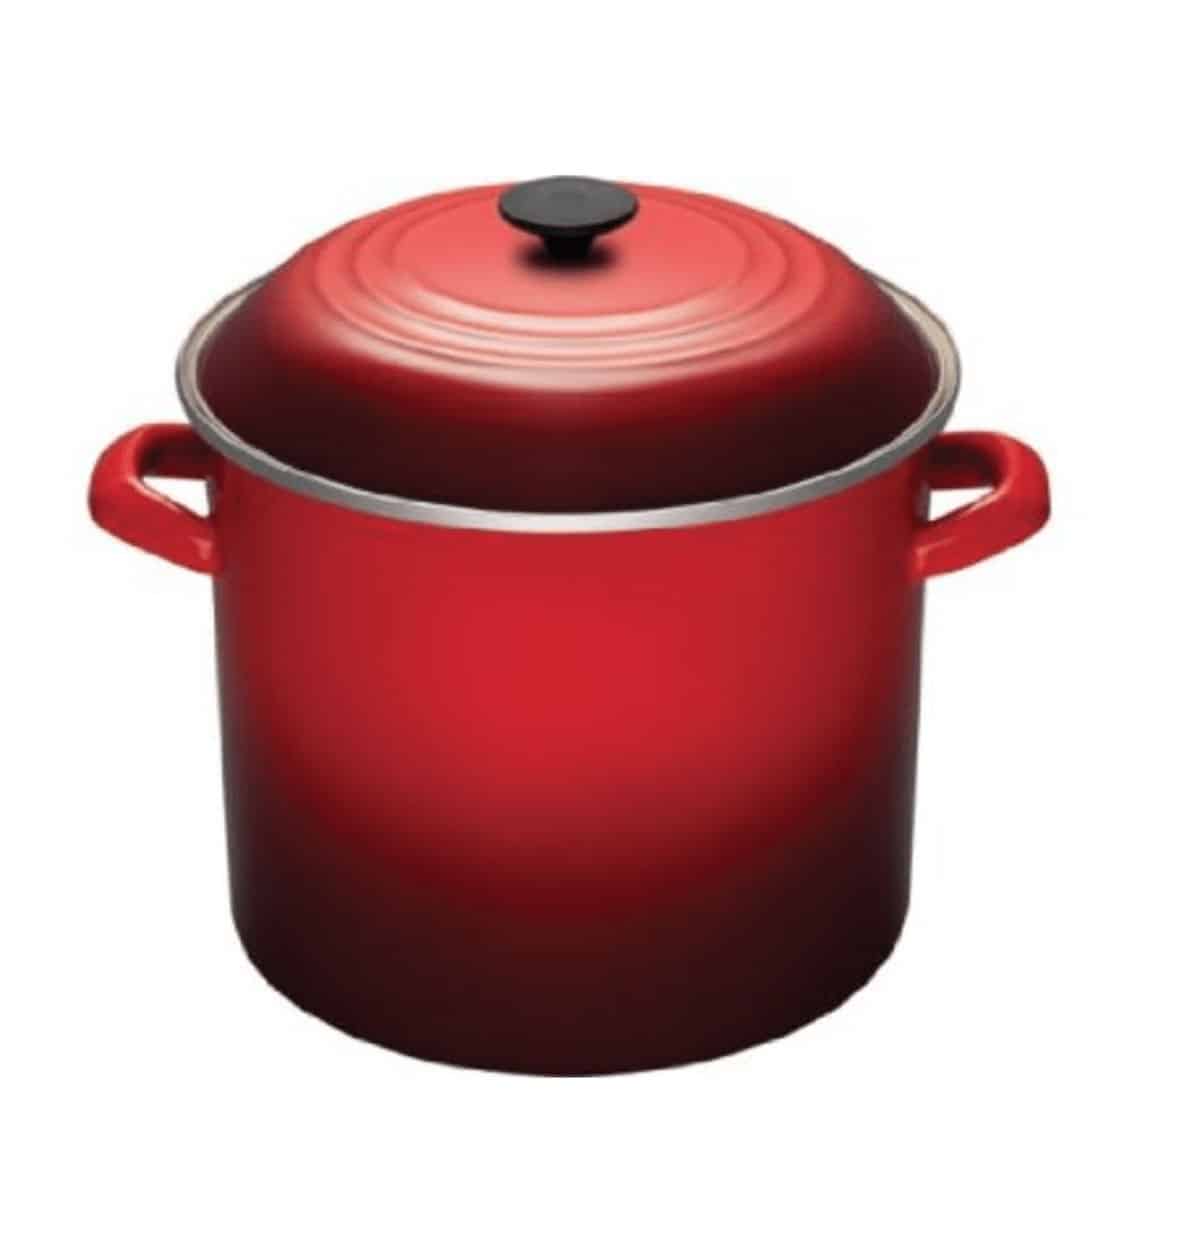 Large red stock pot.